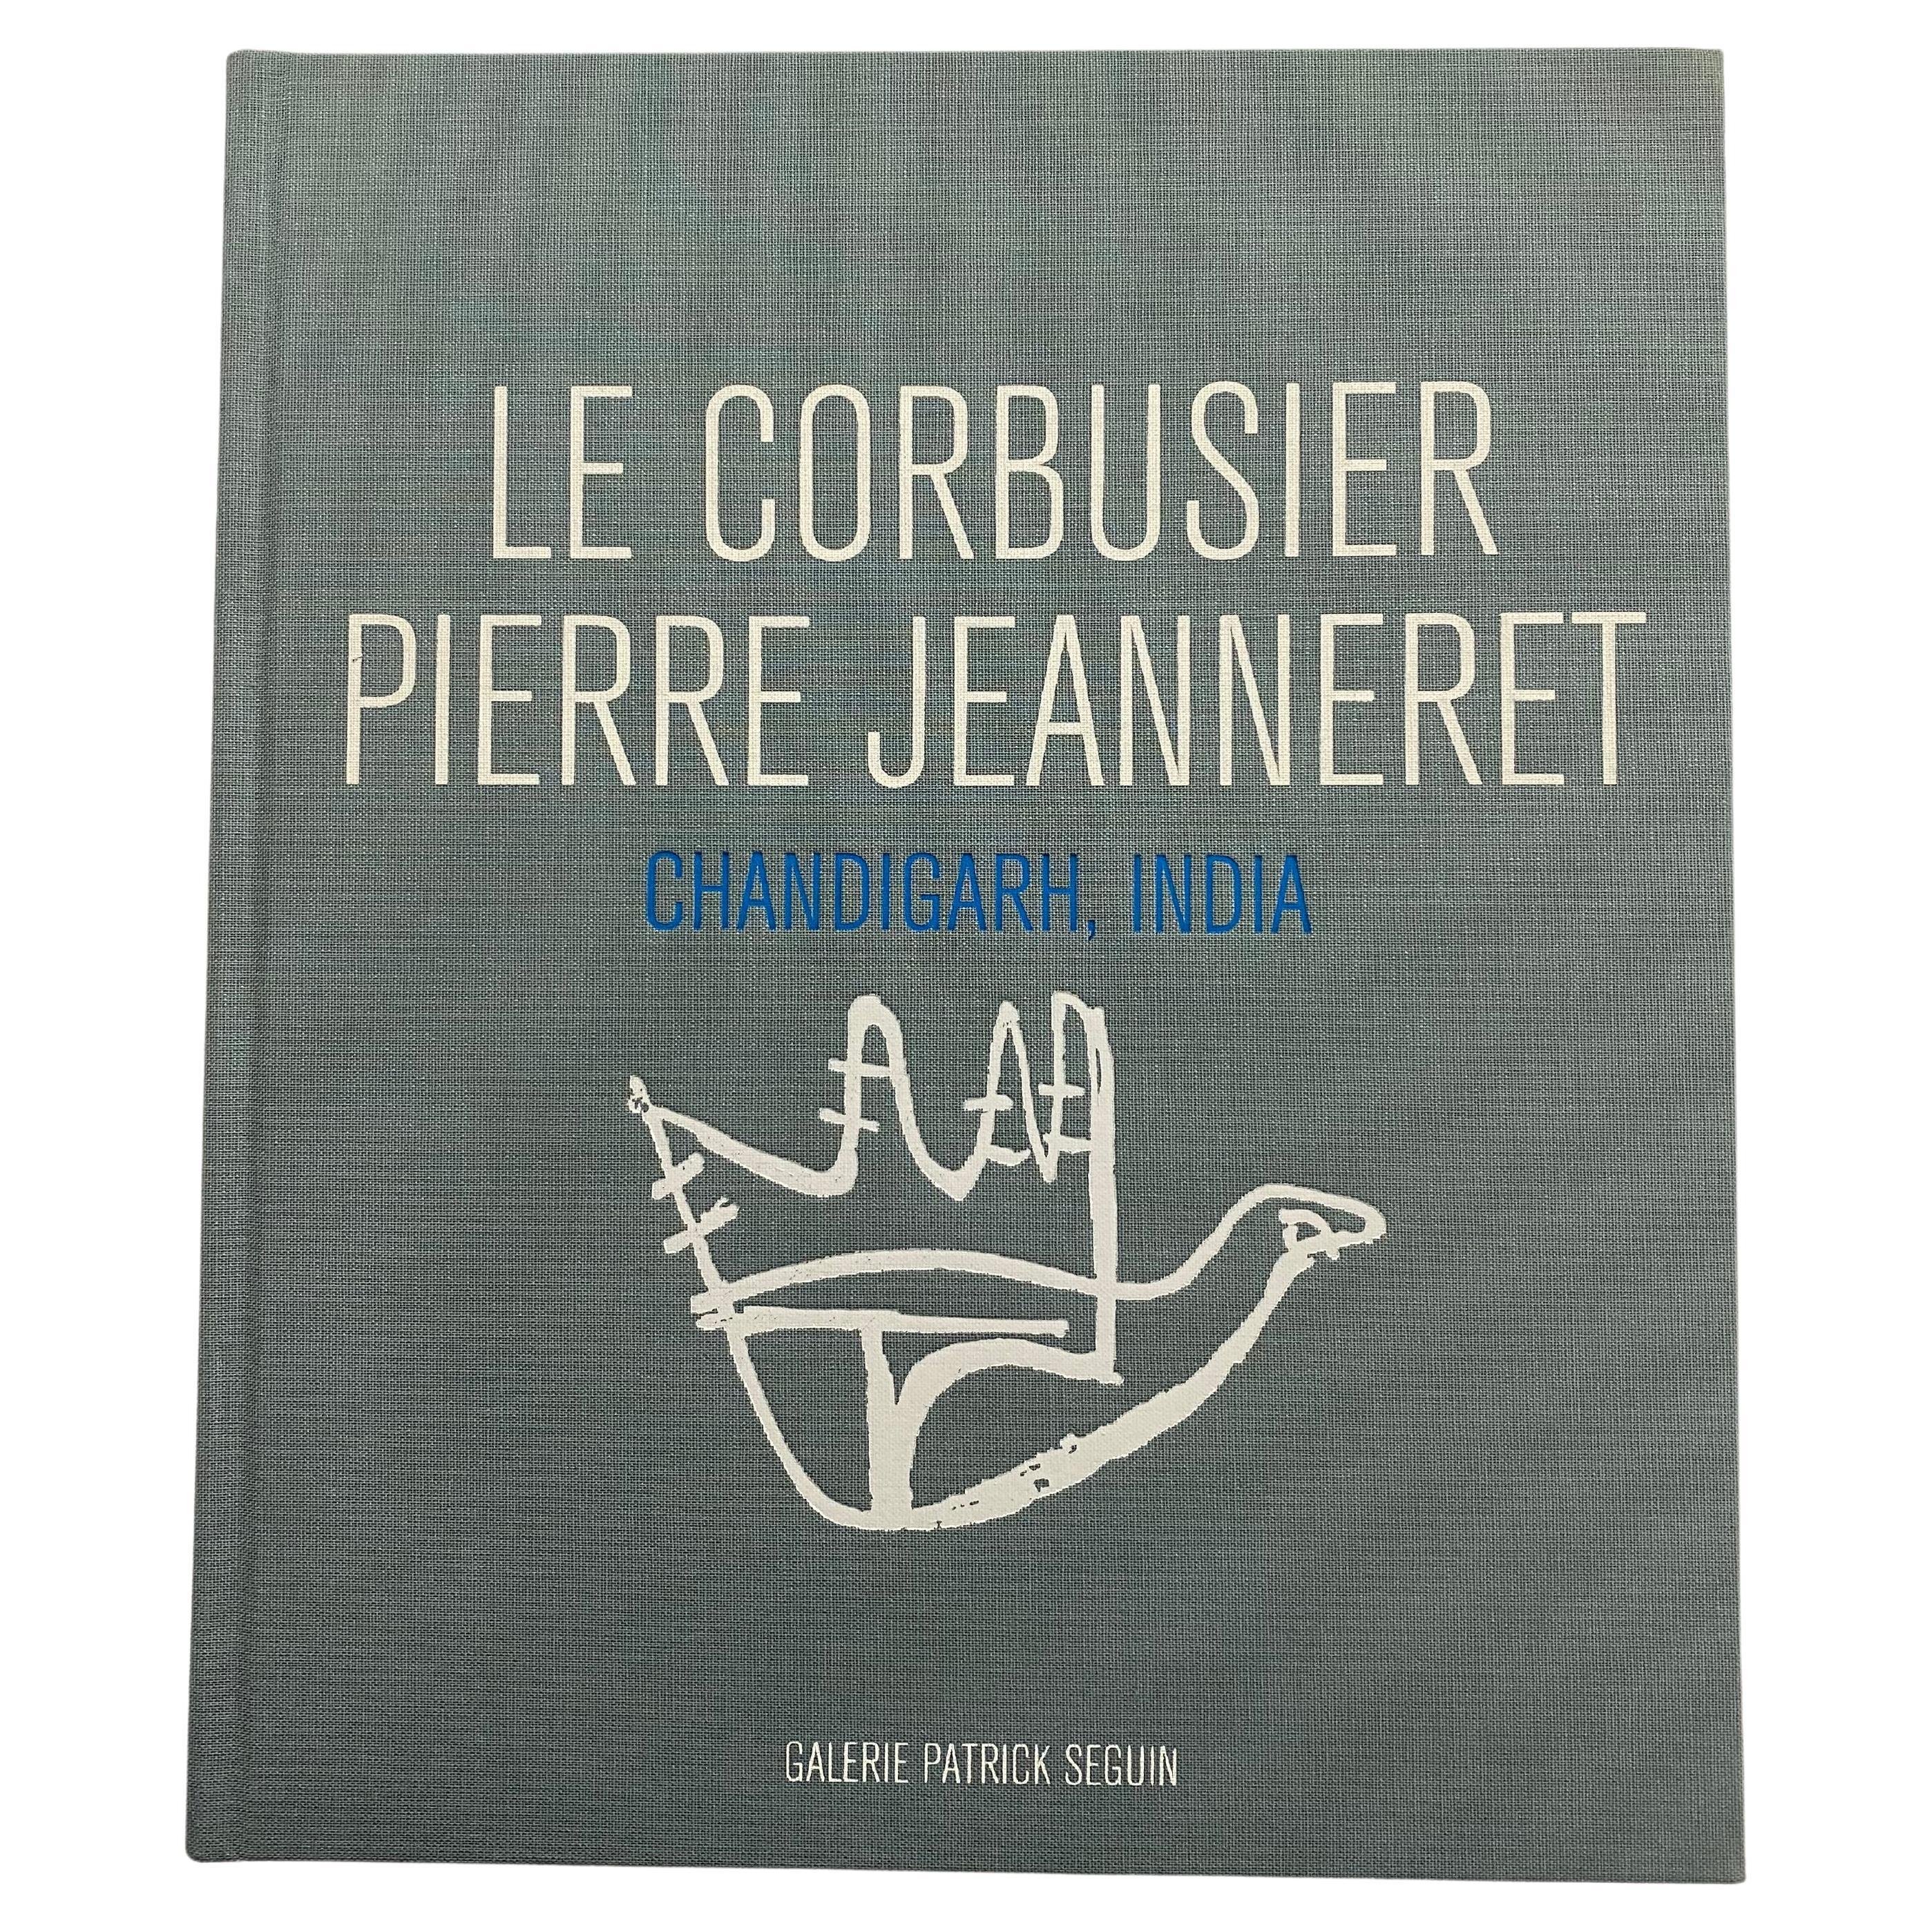 Le Corbusier Pierre Jeanneret: Chandigarth, India, 1951-66 (Book) For Sale